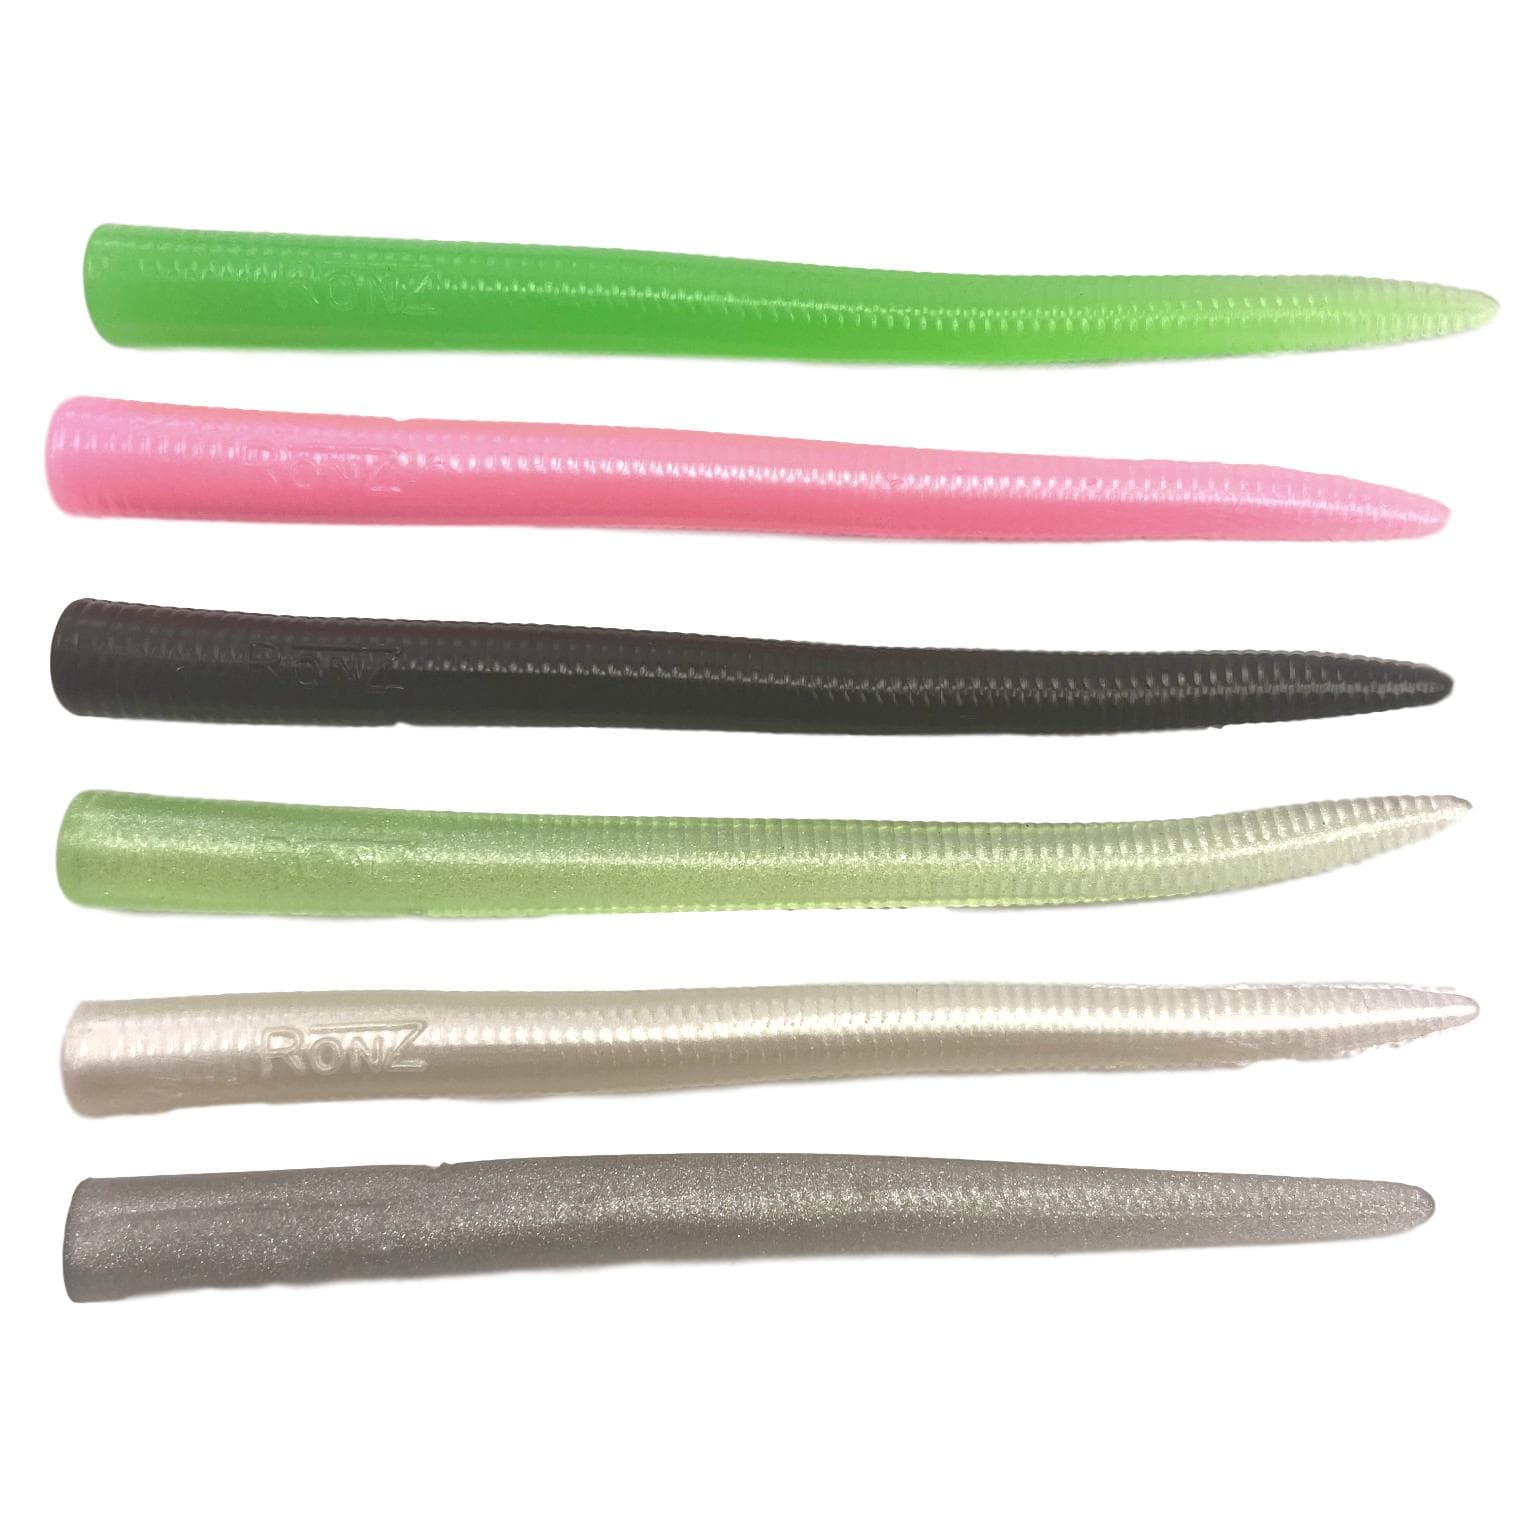 Soft Plastic Lures - The Saltwater Edge